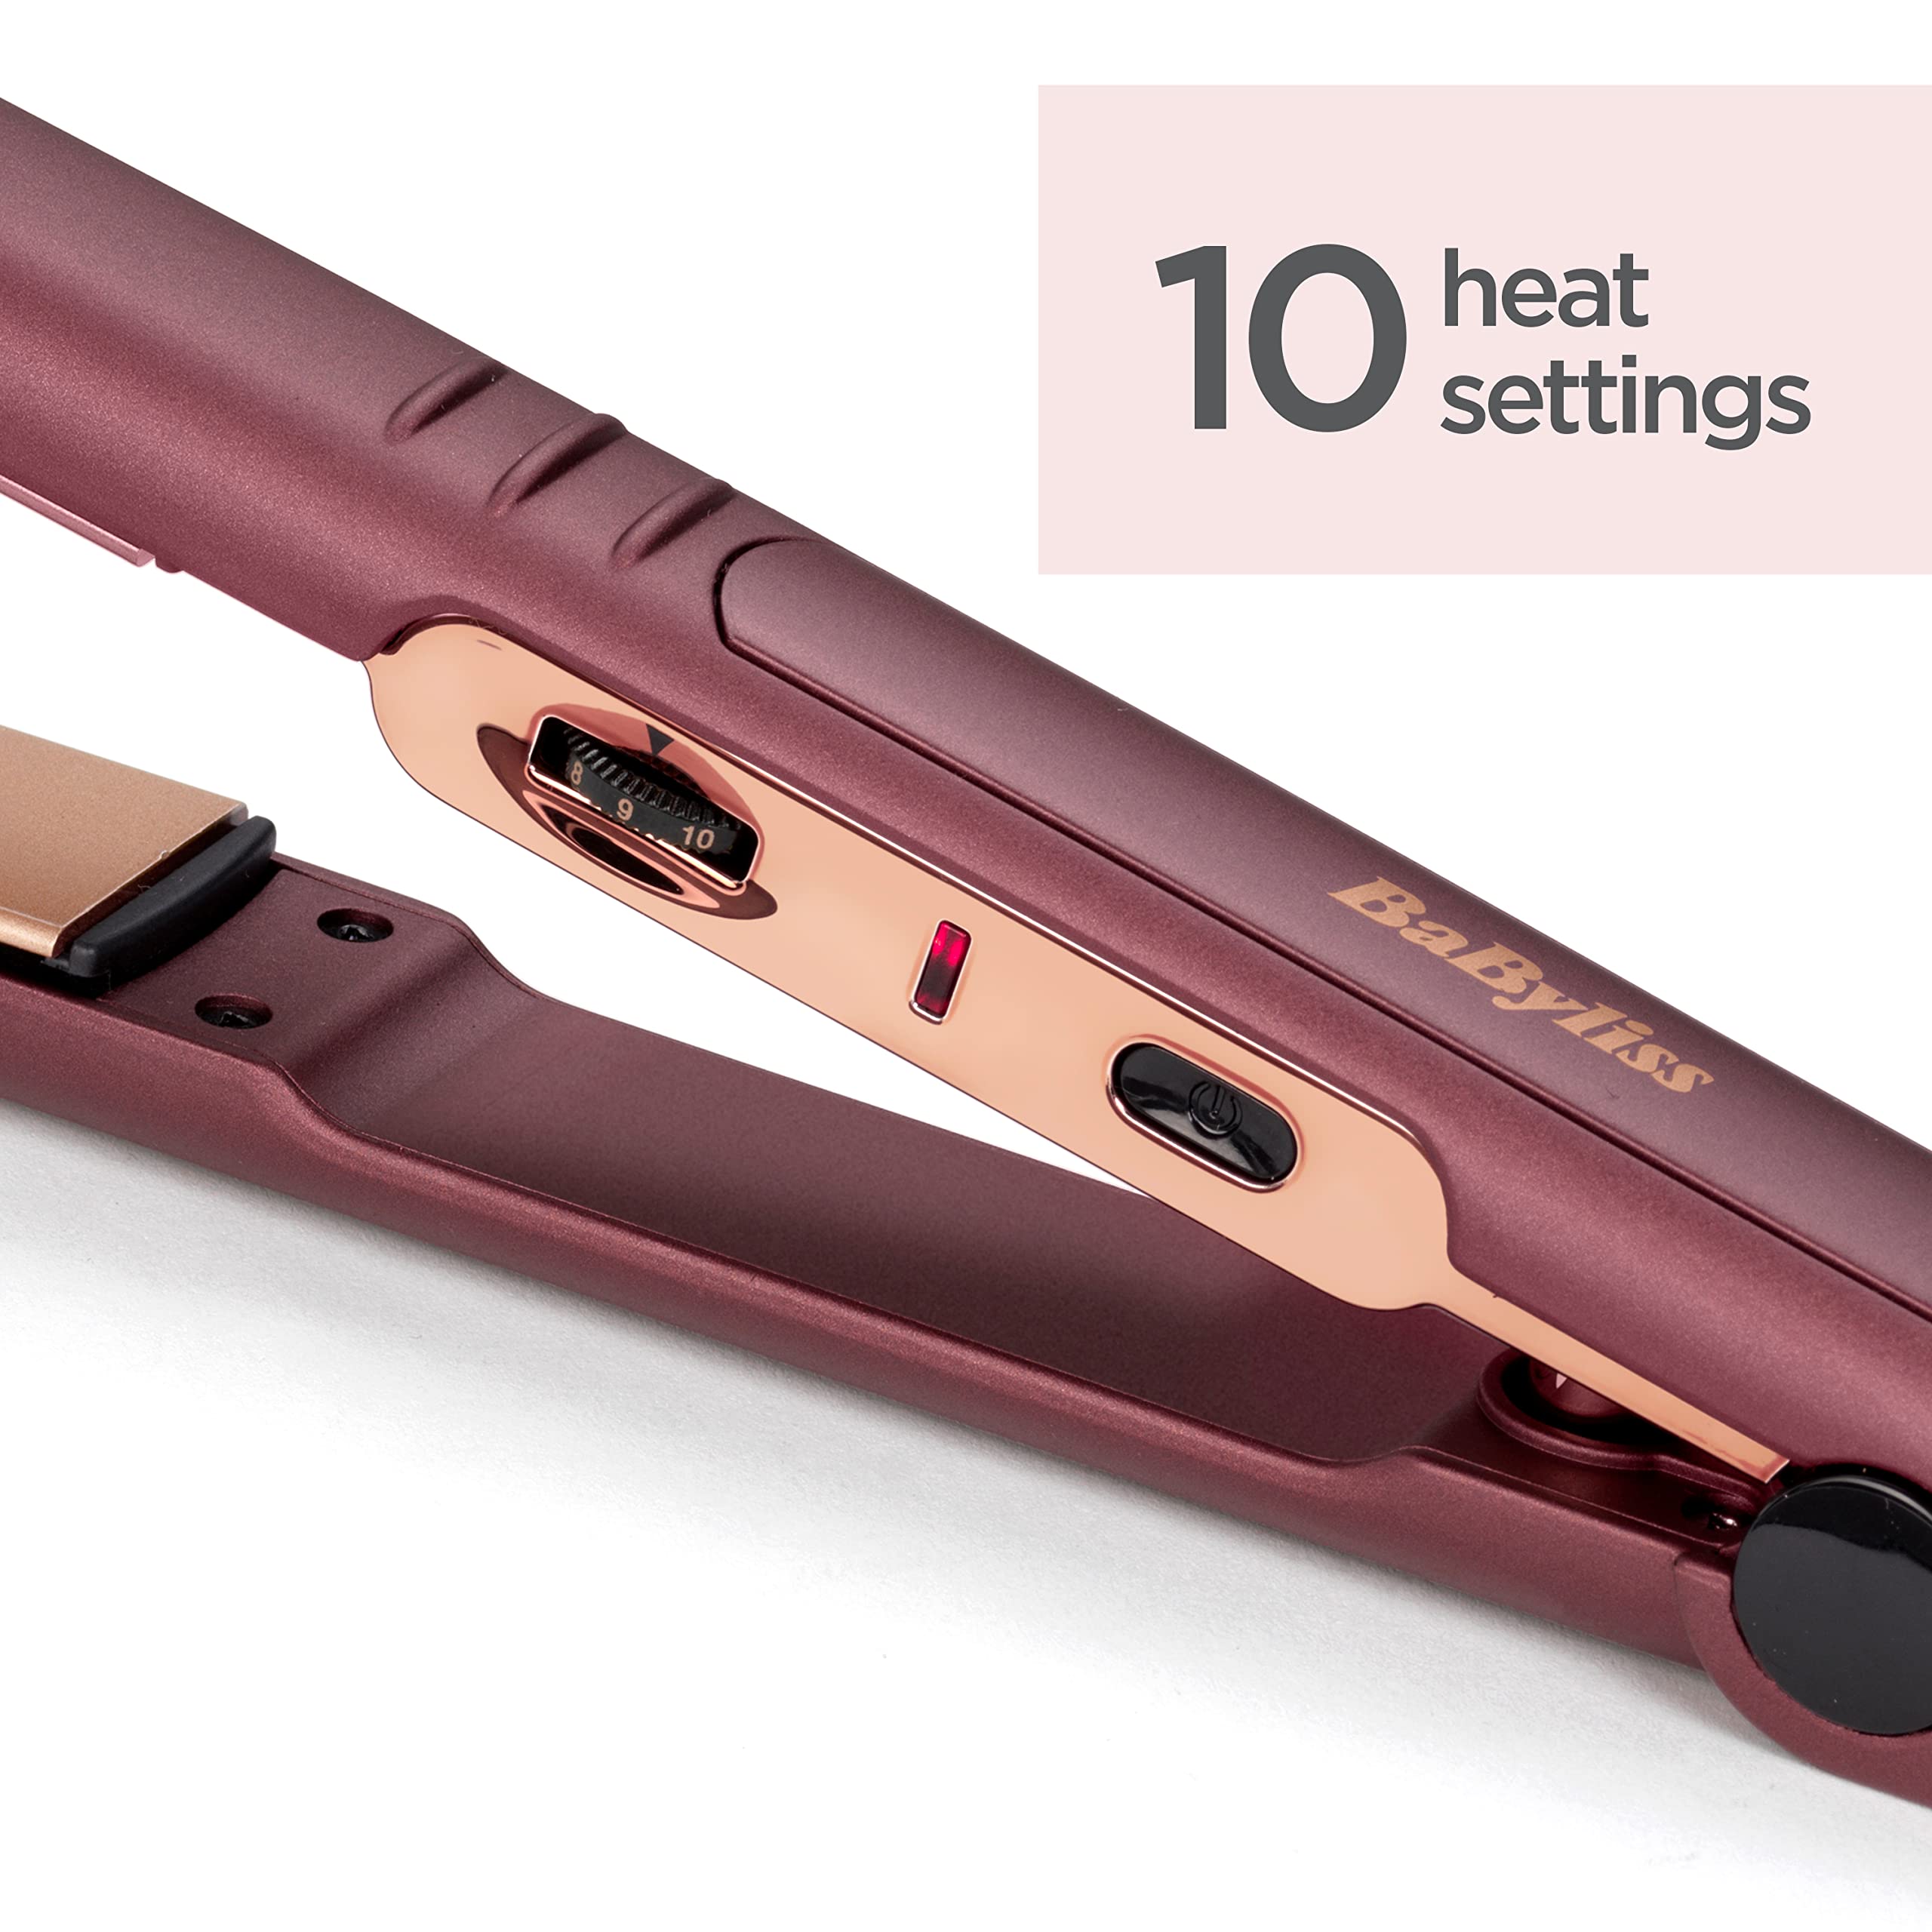 BaByliss Berry Crush 230 Hair Straightener| 10 Heat Settings From 140c - 230c For Use On All Hair Types l Long Length 3m Swivel Cord | Long Length Plates For Fast Smooth Styling | 2183PSDE(Brown)